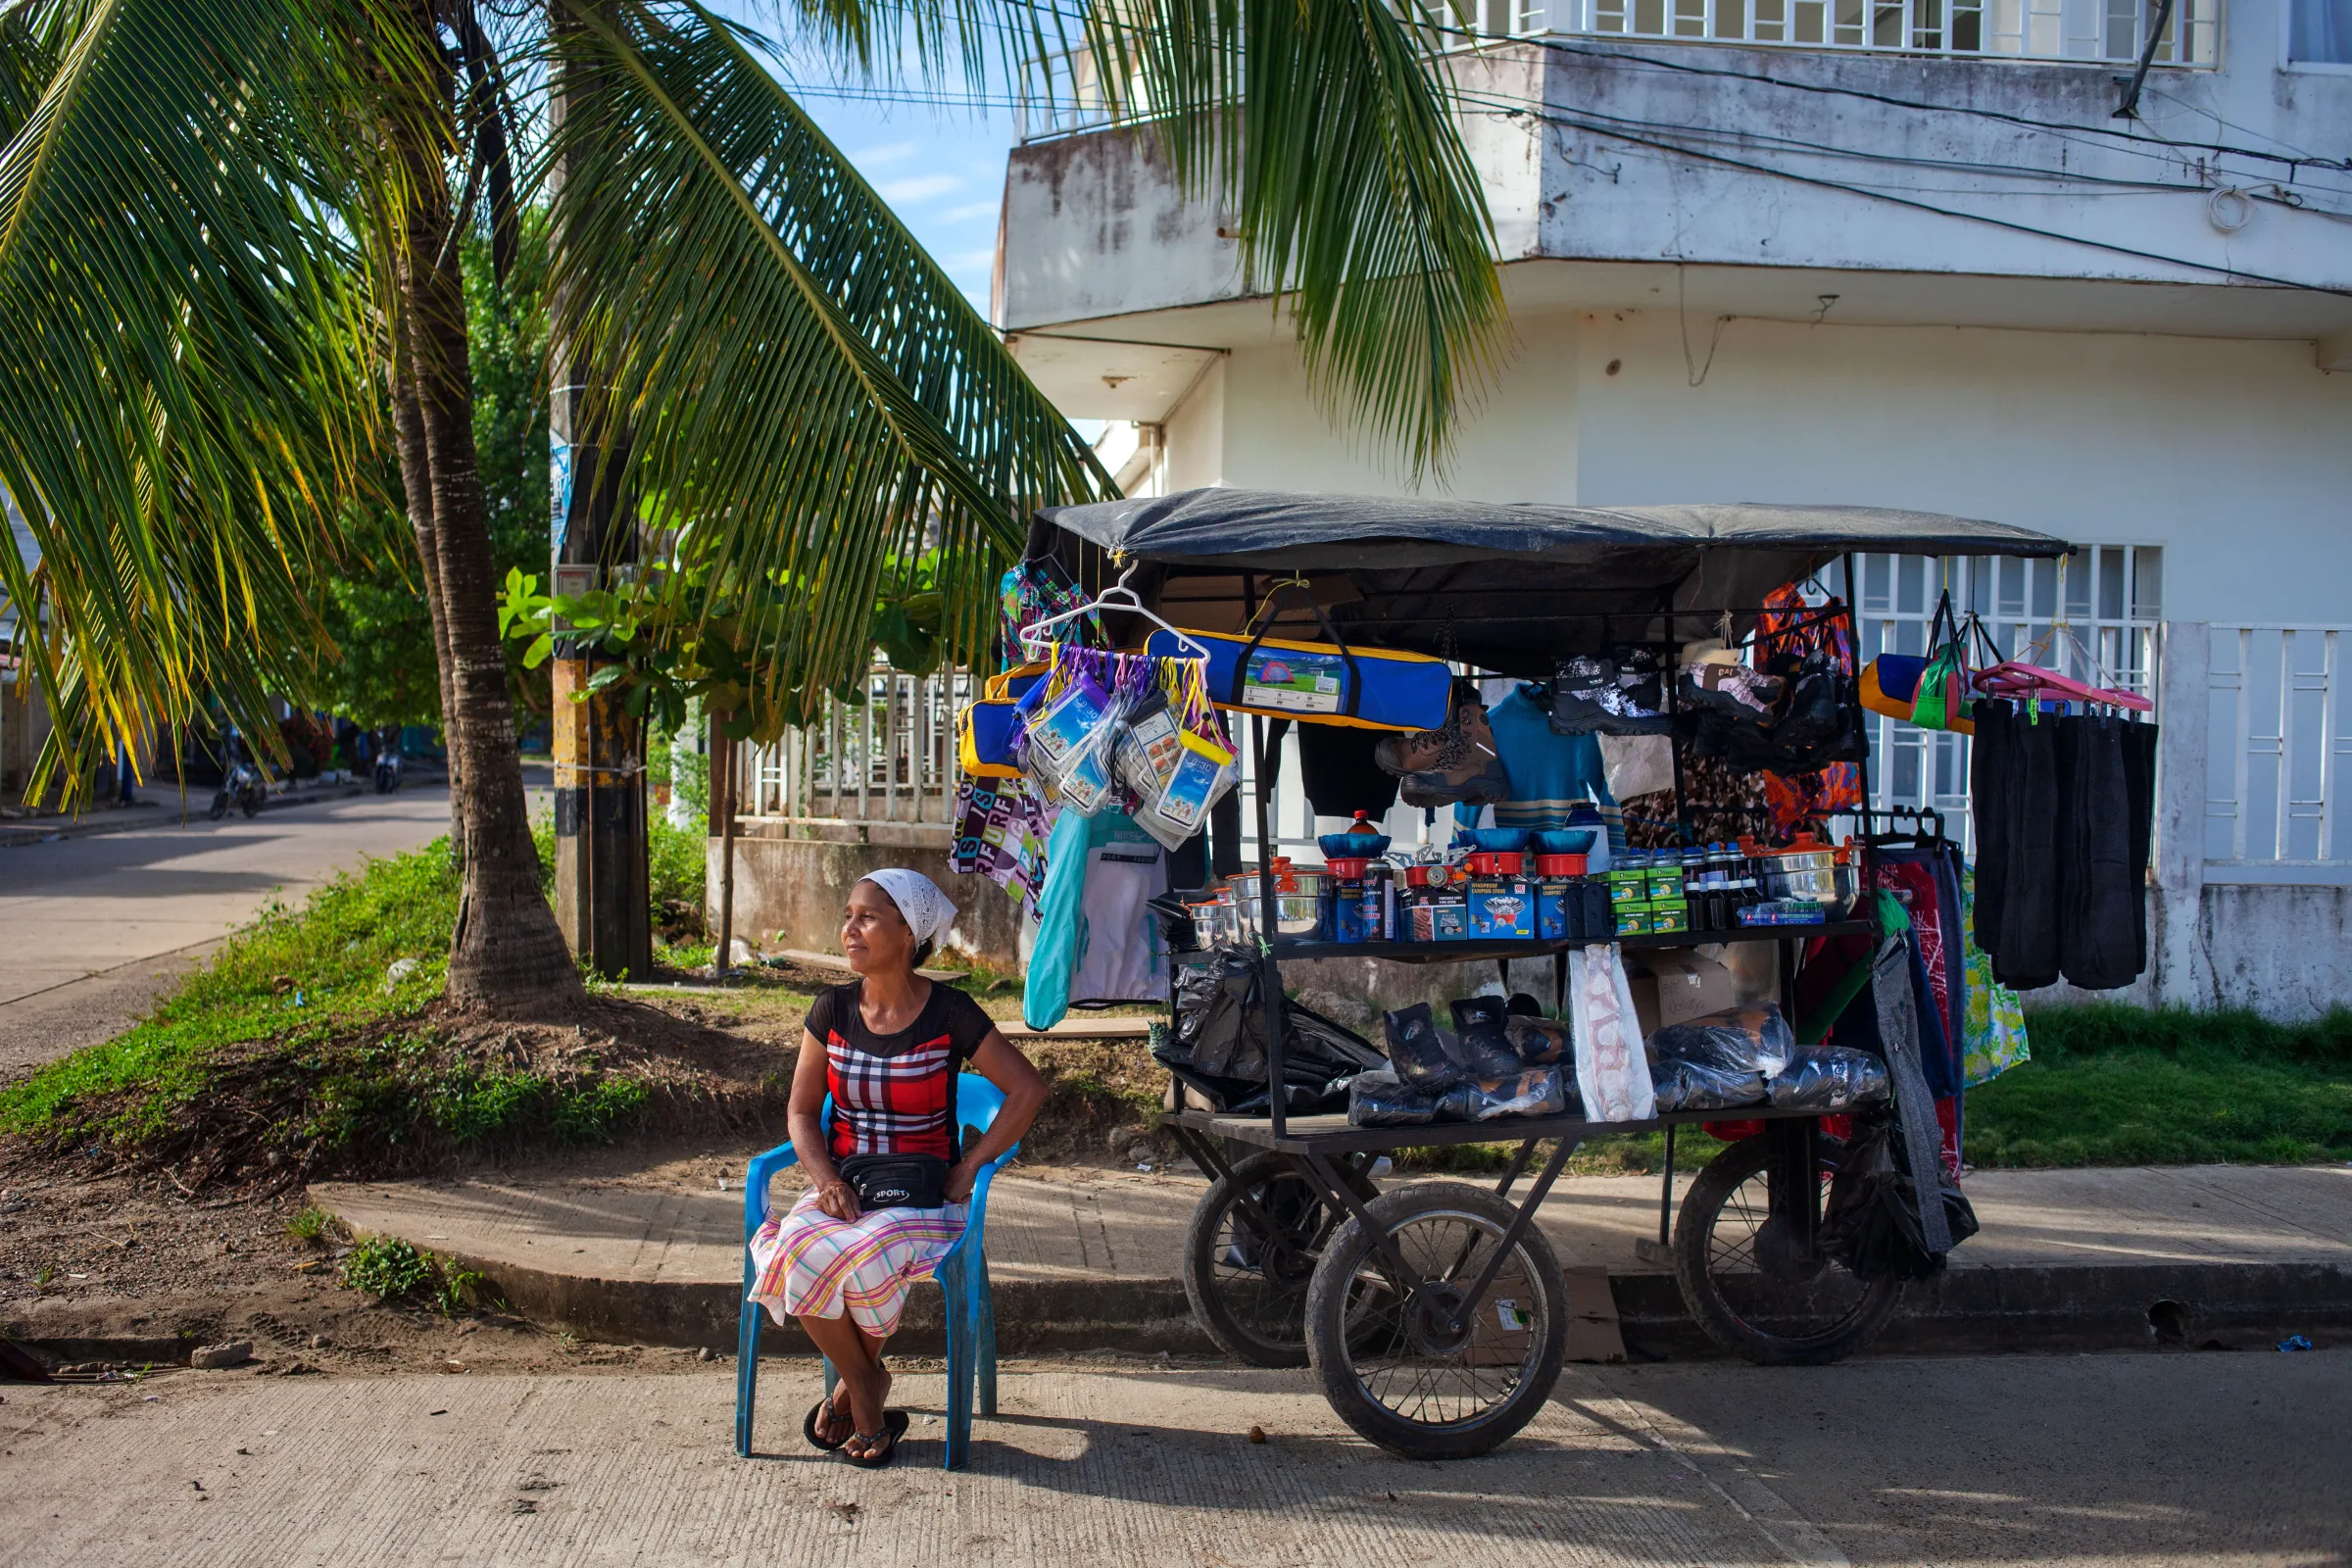 Street seller Graciela Leon sits next to her stall selling jungle kit to migrants in the Colombian beach town of Necoclí along the main beachfront promenade. About 750 migrants on average a day passed through Necoclí this year. Necoclí, Colombia, July 29, 2022. Thomson Reuters Foundation/Fabio Cuttica